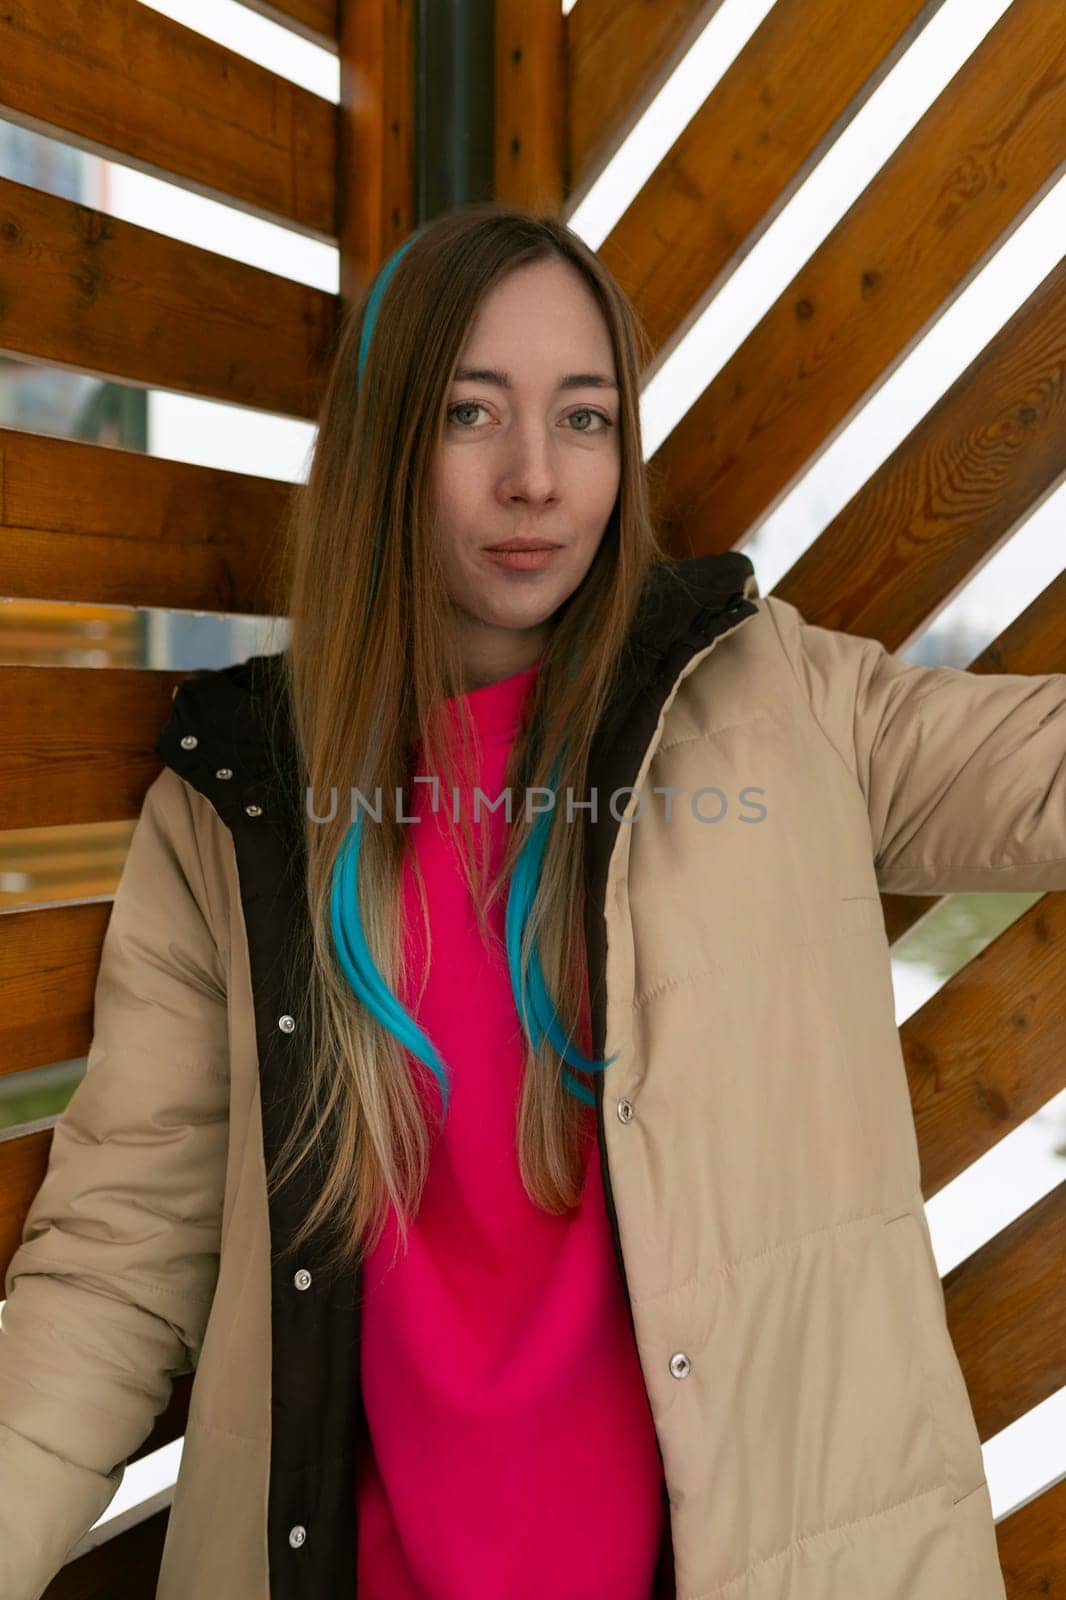 A woman standing upright in front of a weathered wooden wall. She is gazing straight ahead, with a neutral expression on her face. The wooden planks are aged and textured, adding a rustic element to the scene.